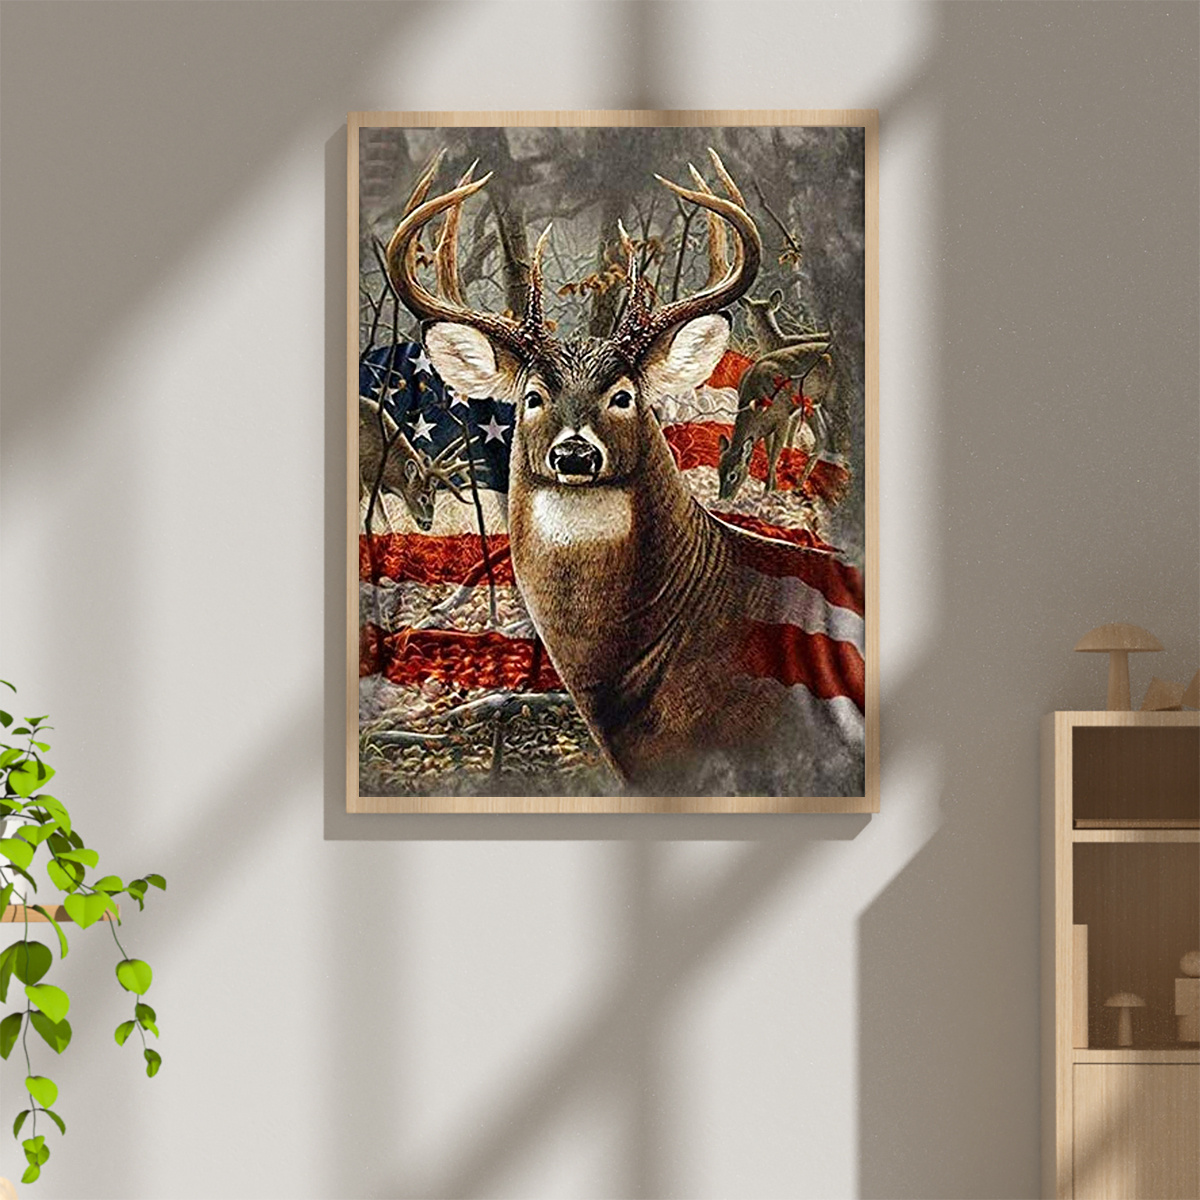 TISHIRON Diamond Painting Kits,12x16 inch 5D DIY Forest Deer Diamond Art  Crafts Kit for Home Wall Decor Gift 